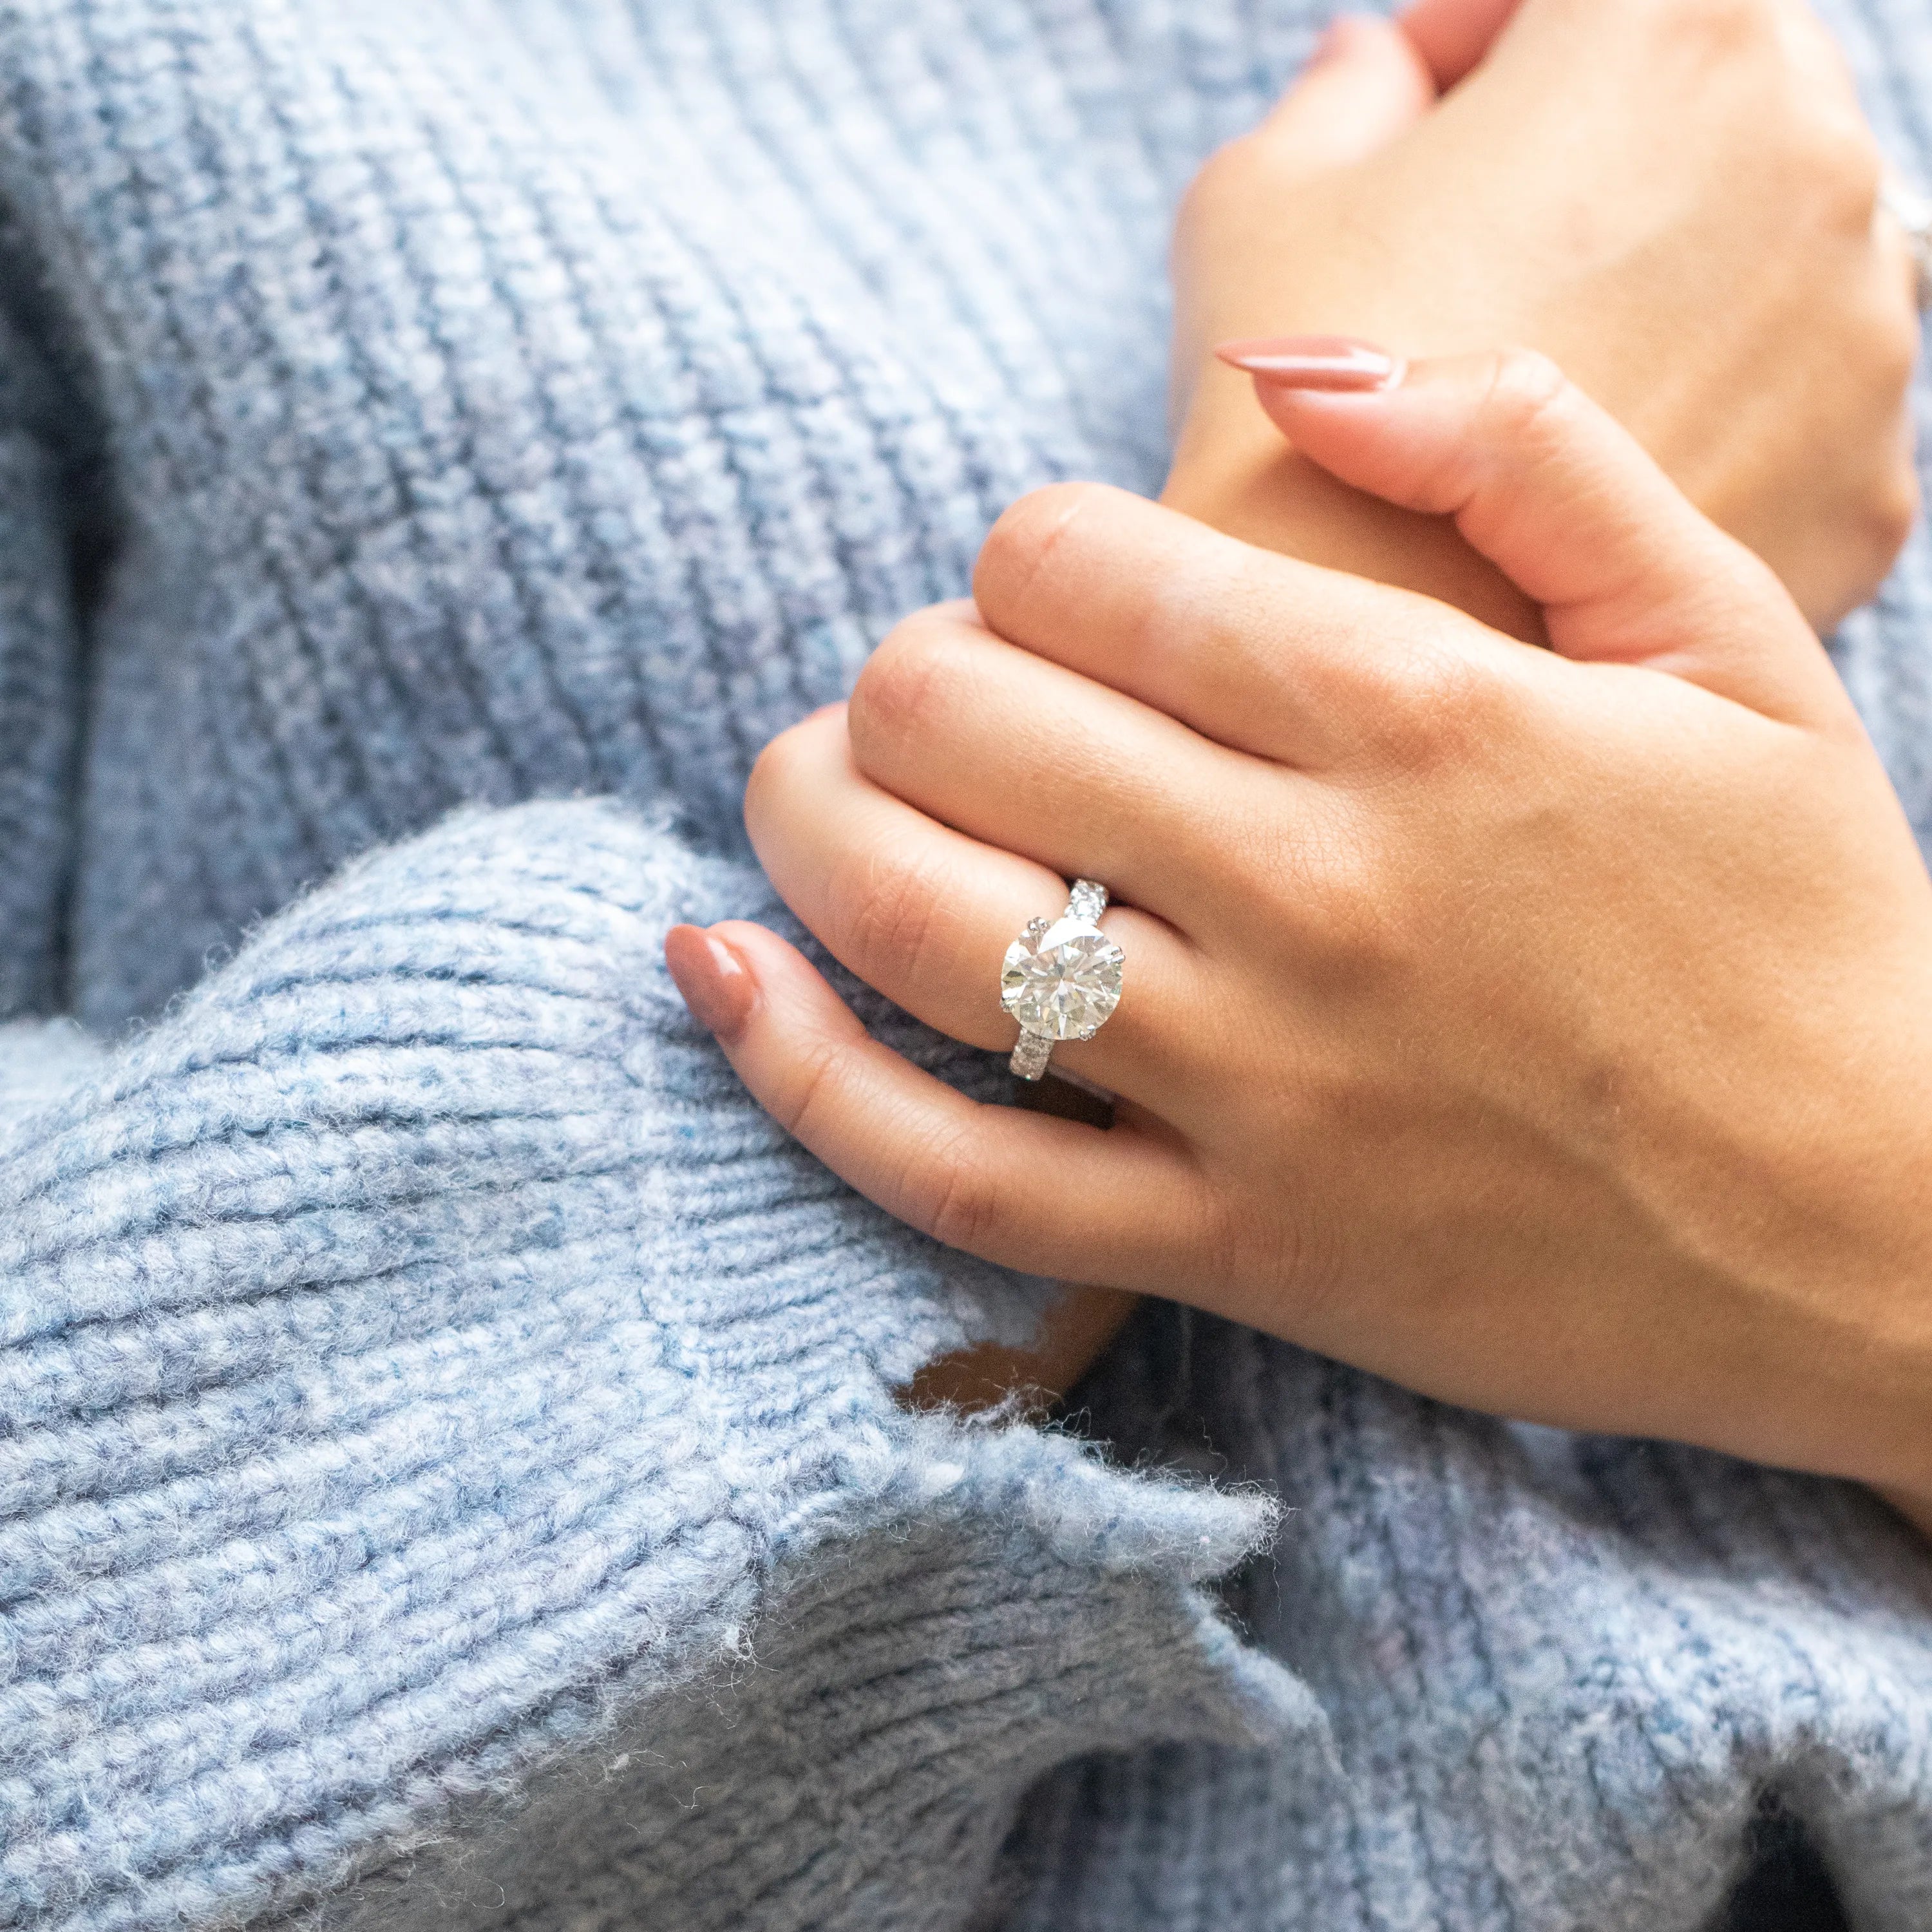 Helpful Tips for Saving for an Engagement Ring